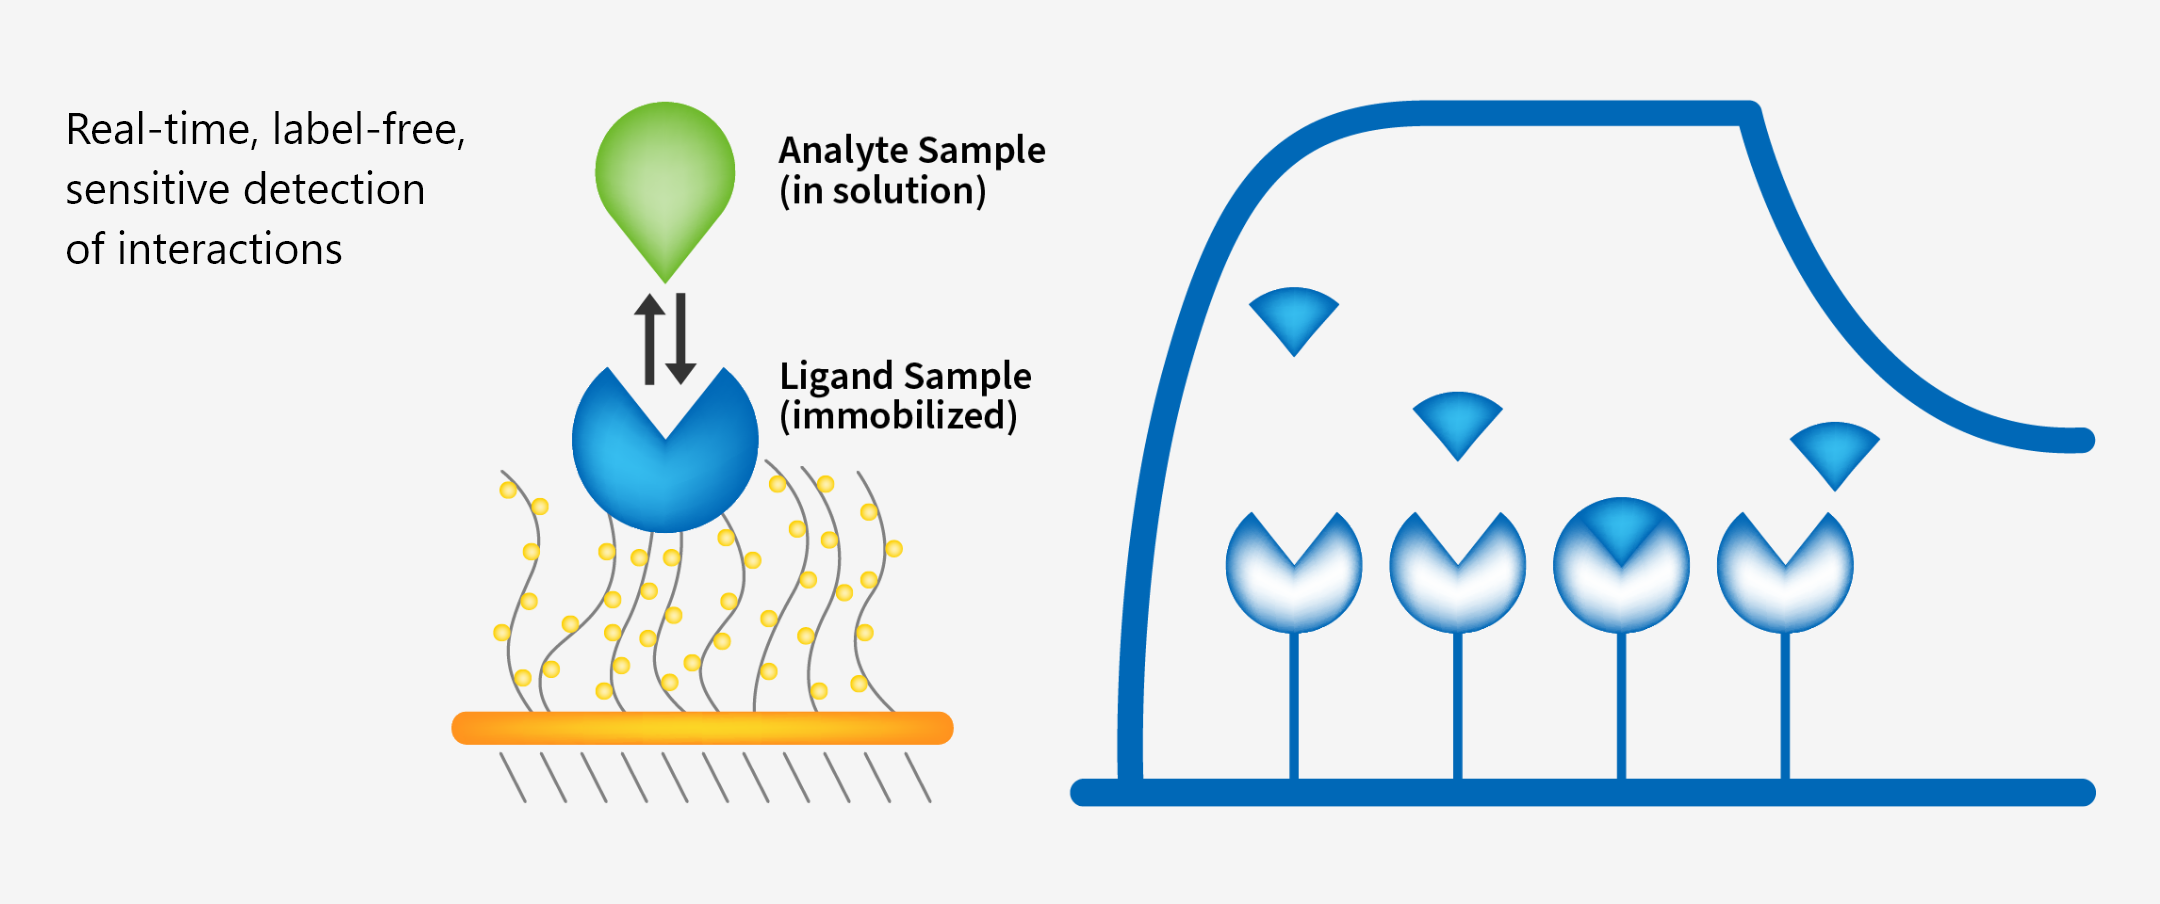 SPR is a real-time, label-free method of sensitive detection of molecules interactions.